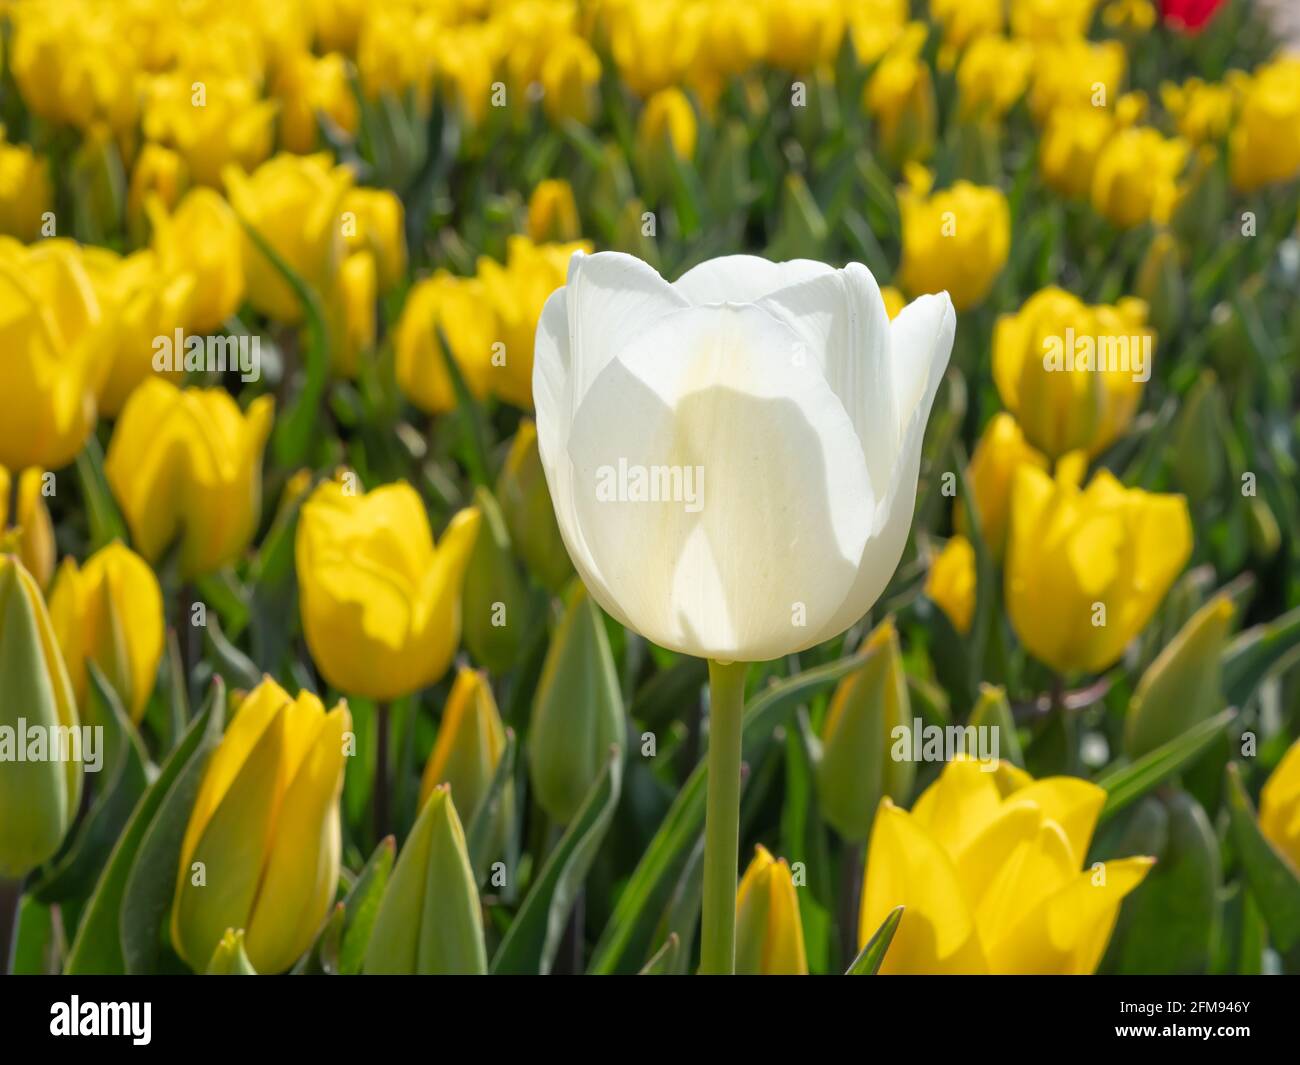 Tulip field with yellow flowers with a white tulip in the foreground, North Rhine-Westphalia, Germany Stock Photo